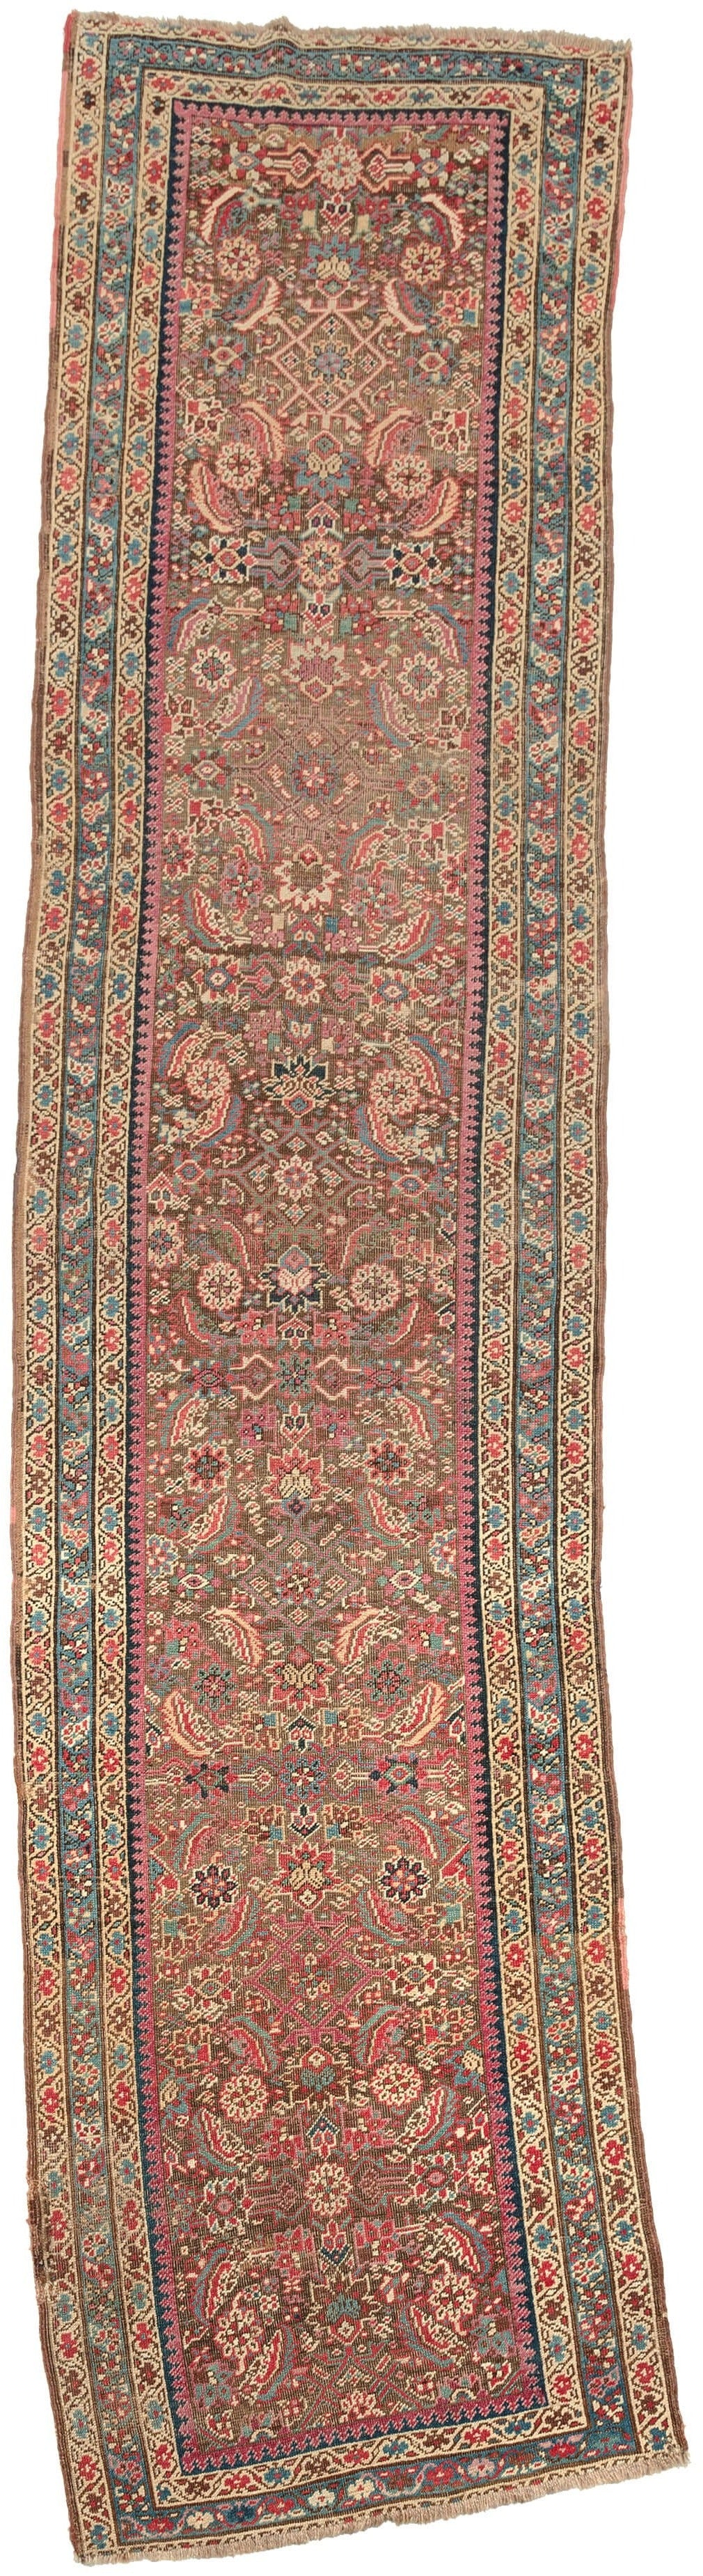 This Karabagh runner was woven in the south Caucasus by Armenians during the late 19th century.  It features an all over herati design pattern in blues, greens, reds, pinks, yellow and ivory on a chocolate ground. The ground has oxidized adding dimensionality to the piece. Framed by a inner laleh abbasi border and three outer borders of scrolling rosettes on exceptional blue and yellow grounds.